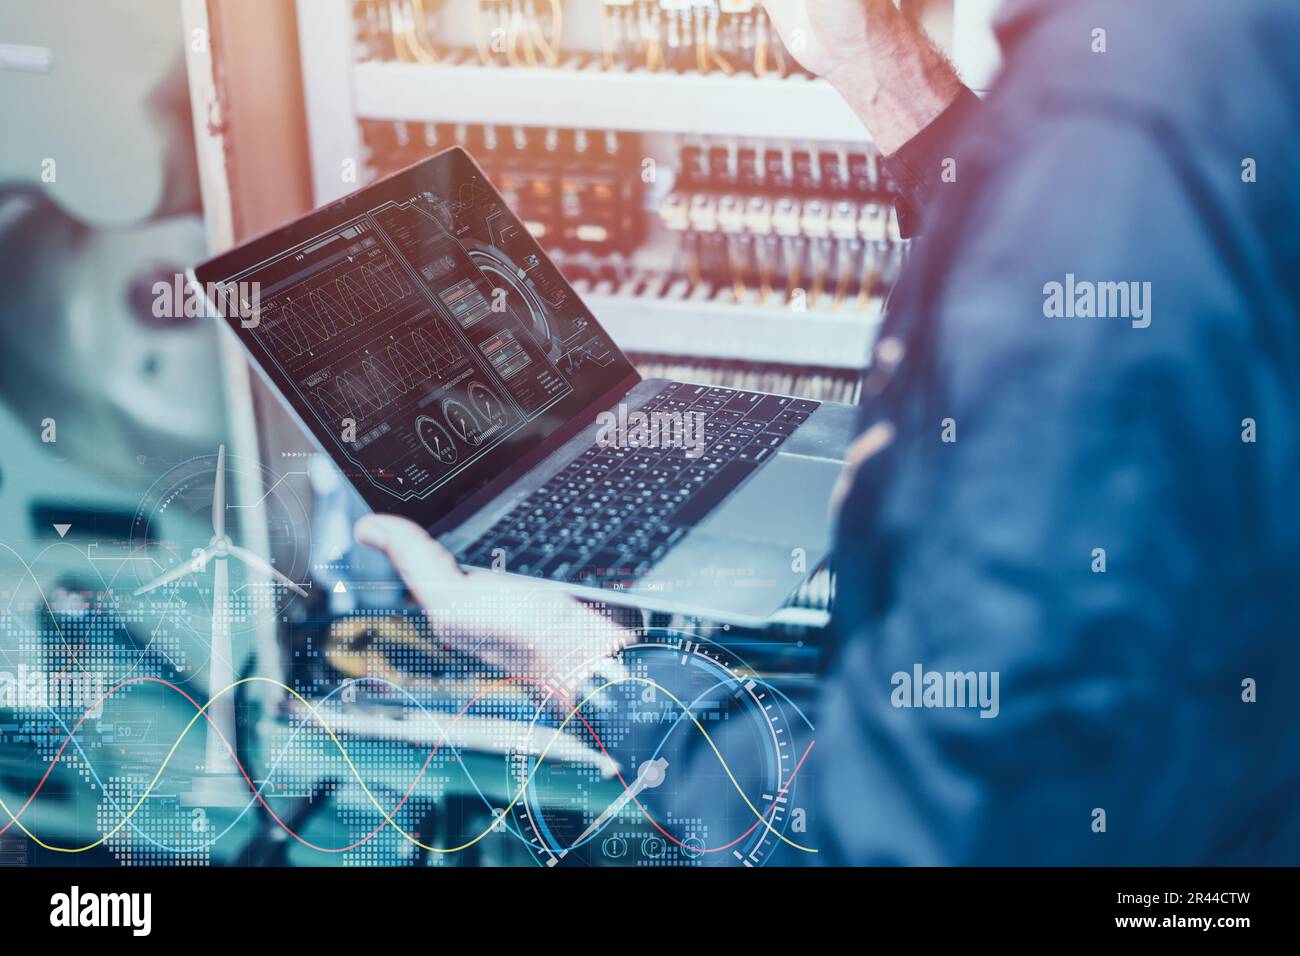 Electricity engineer work using AI computer software control monitor power consumption saving energy concept Stock Photo